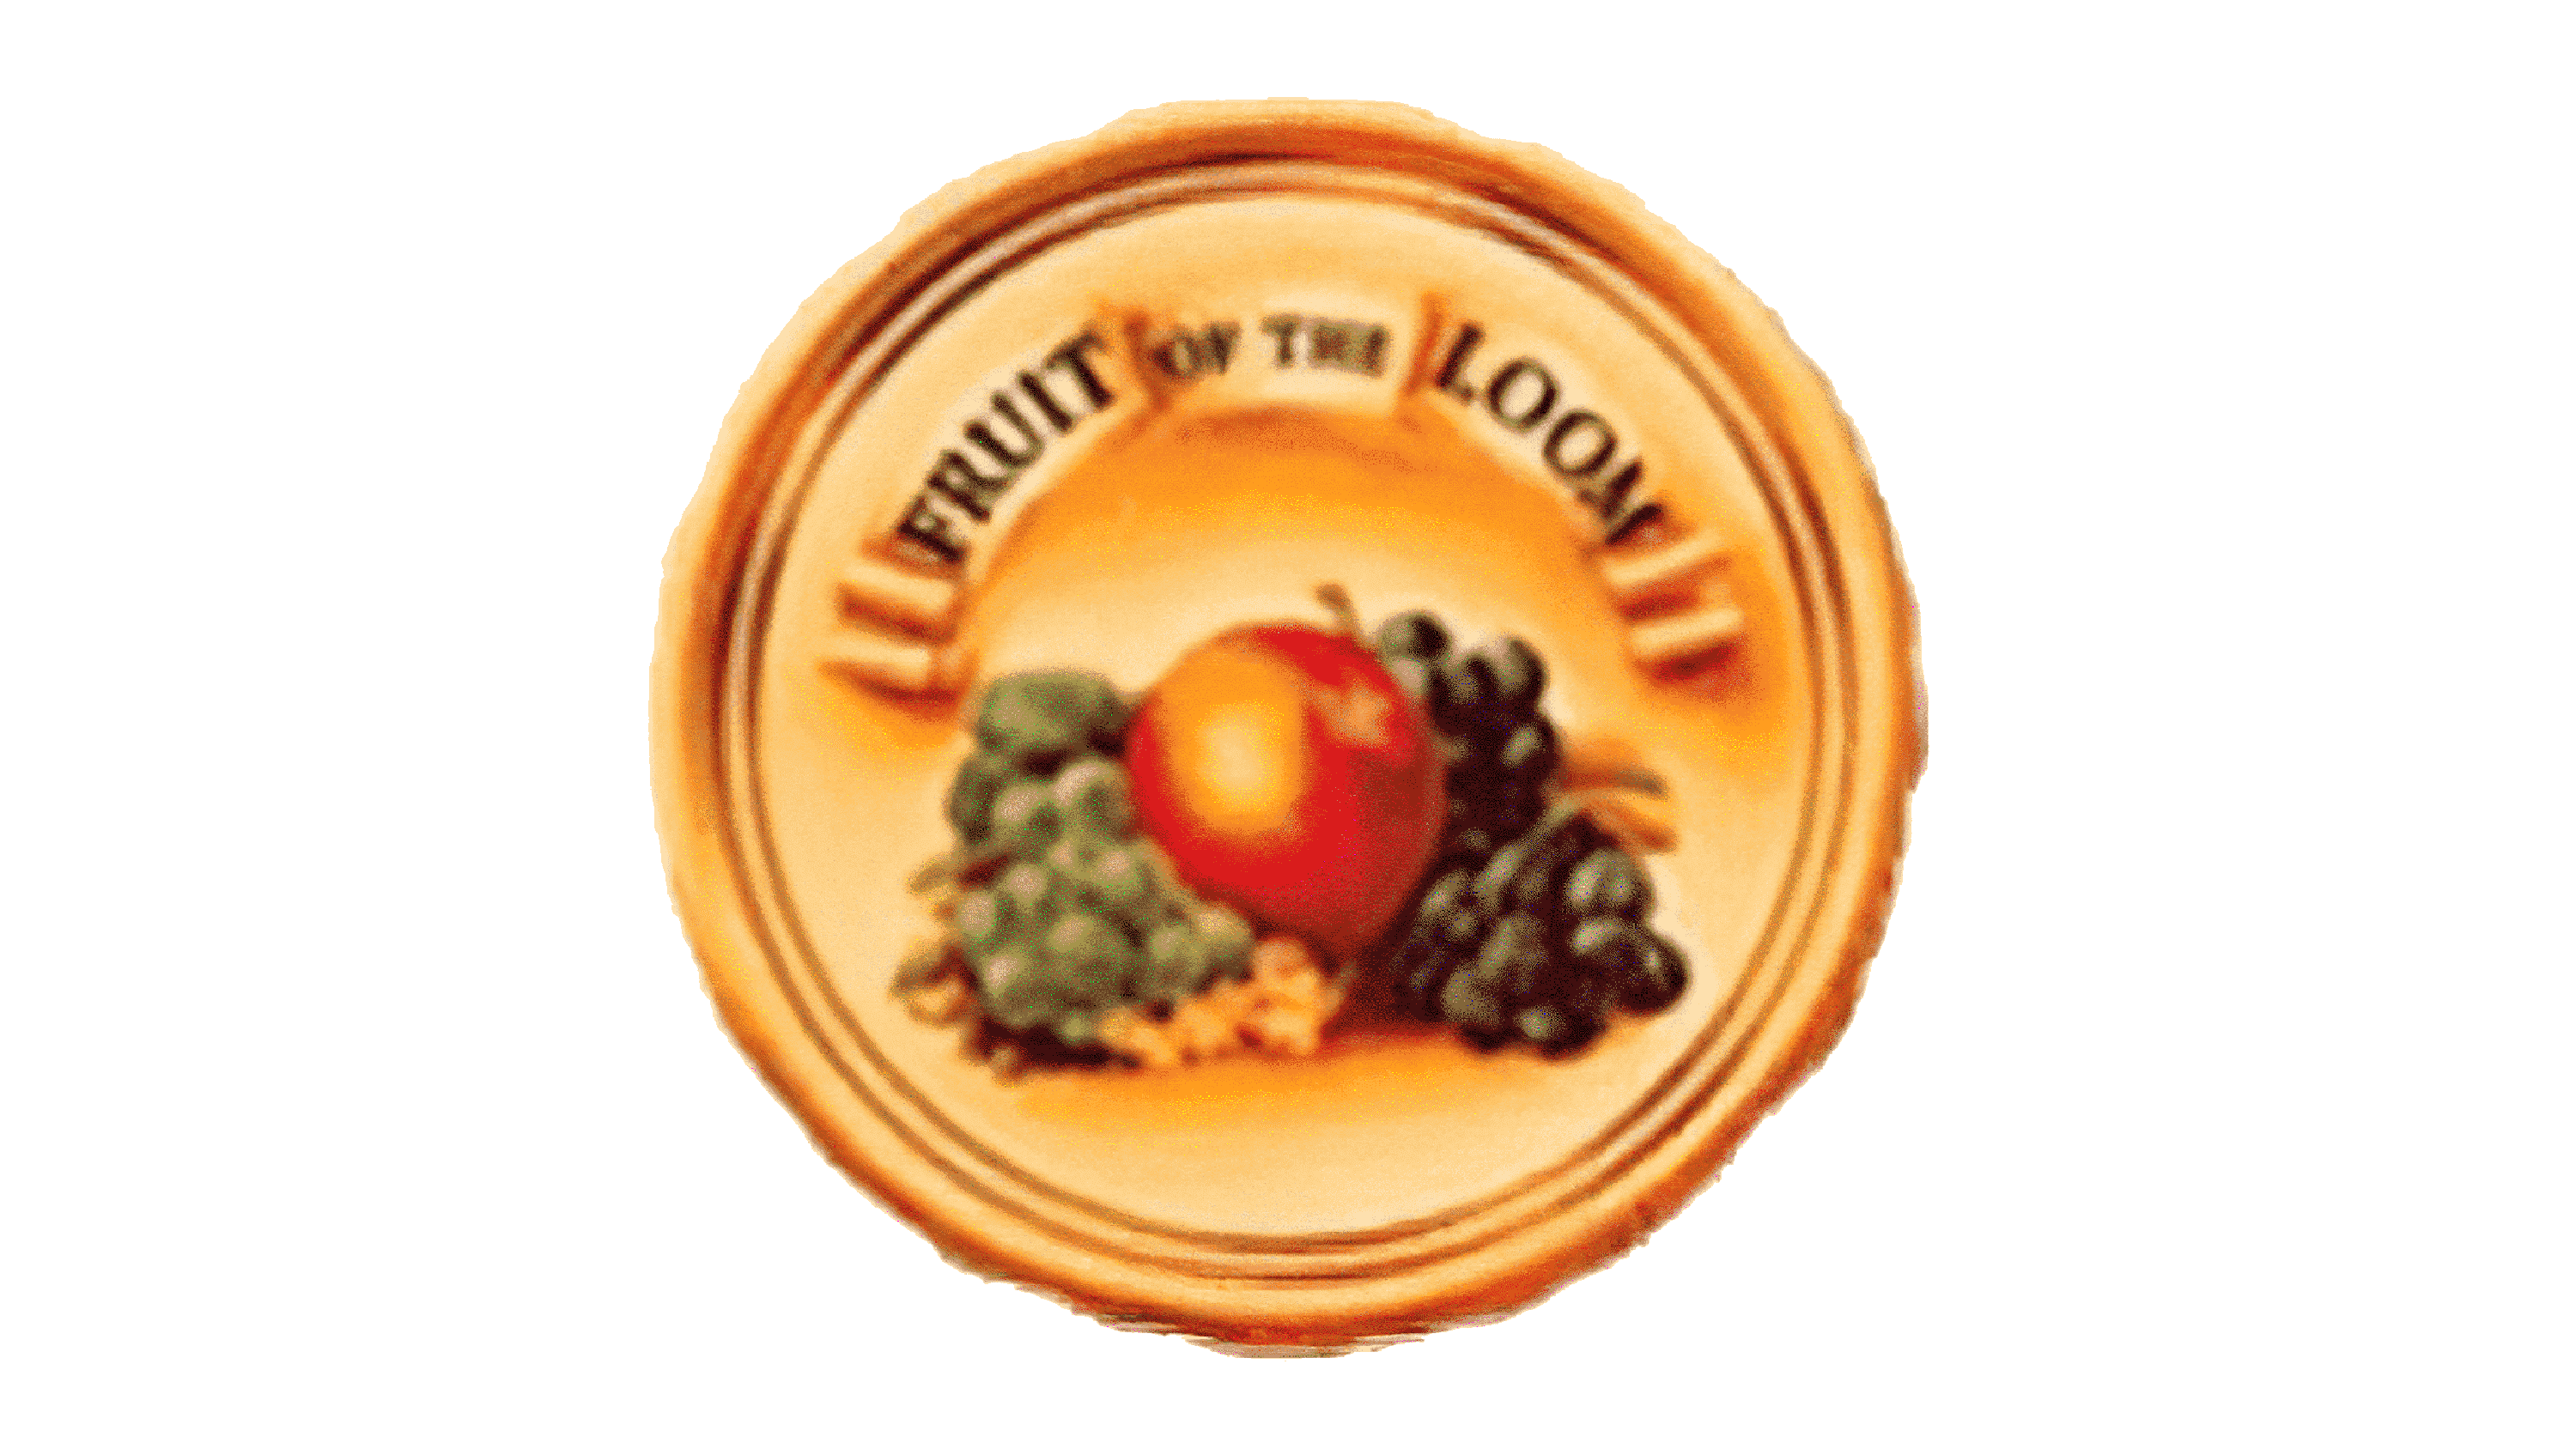 What is the significance of the fruit in Fruit of the Loom's logo? - Quora